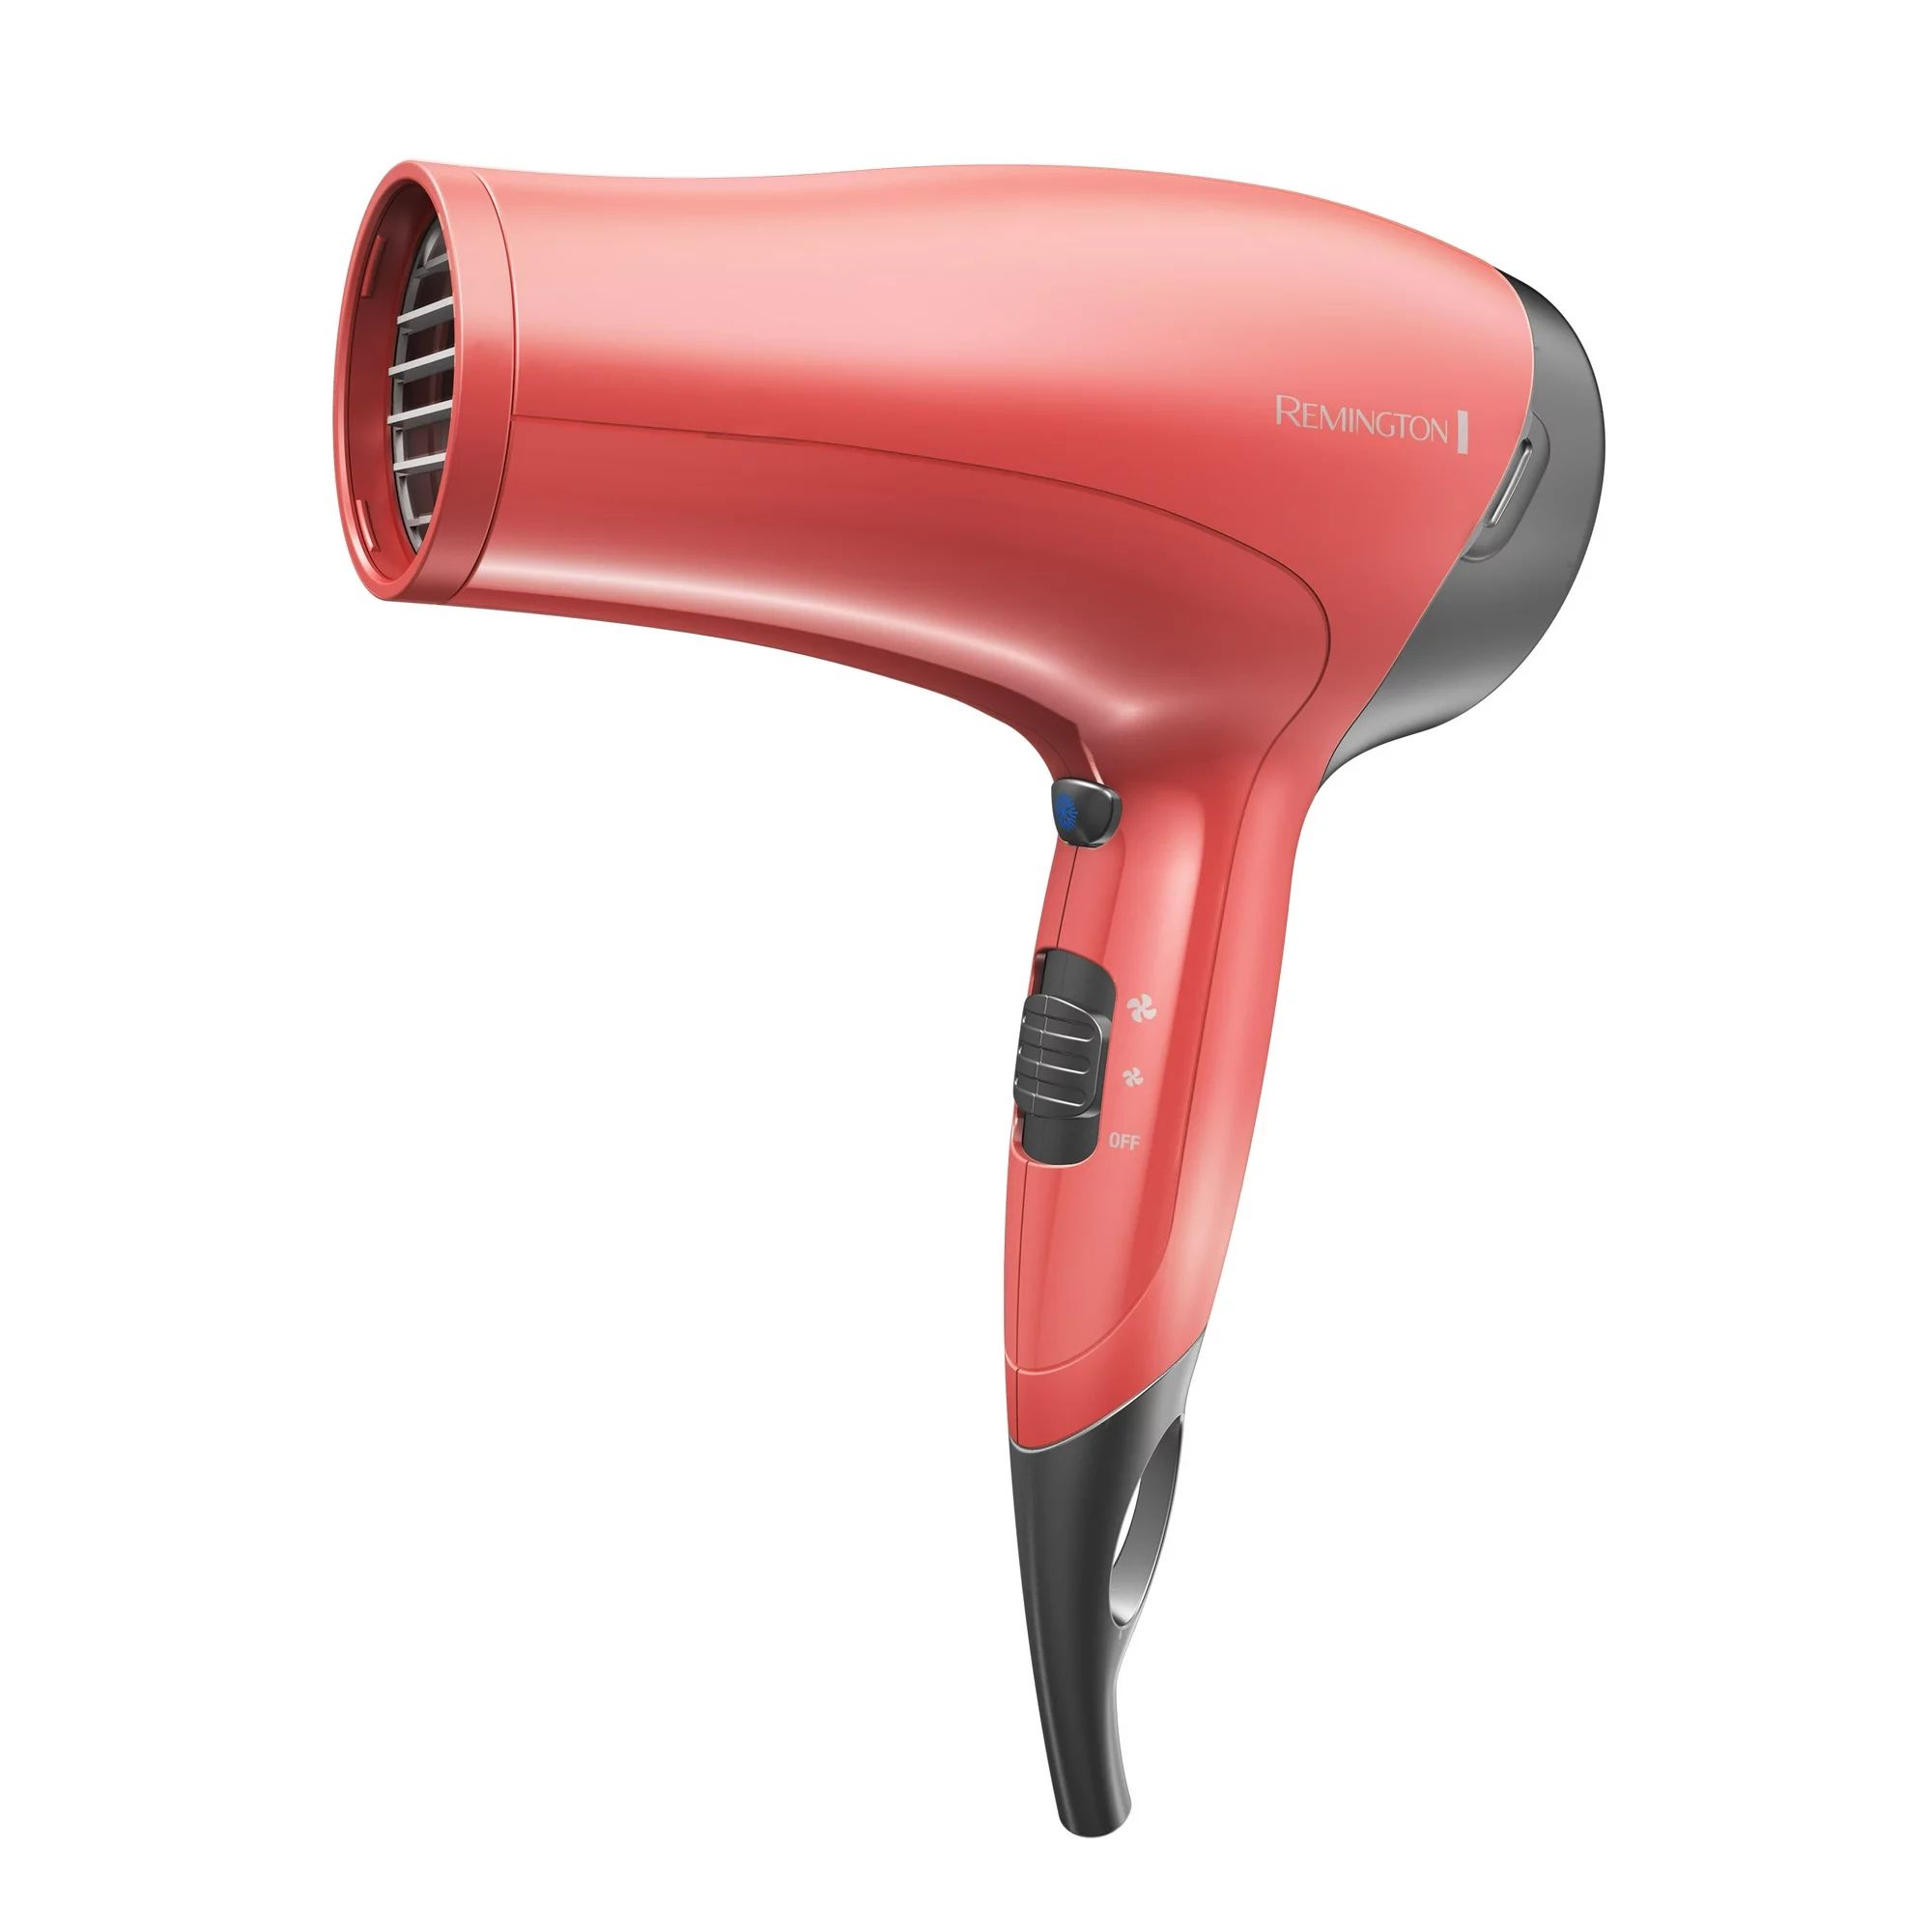 Remington Mid-Size Hair Dryer with Ionic Ceramic Technology, Pink, D3015E | Walmart (US)